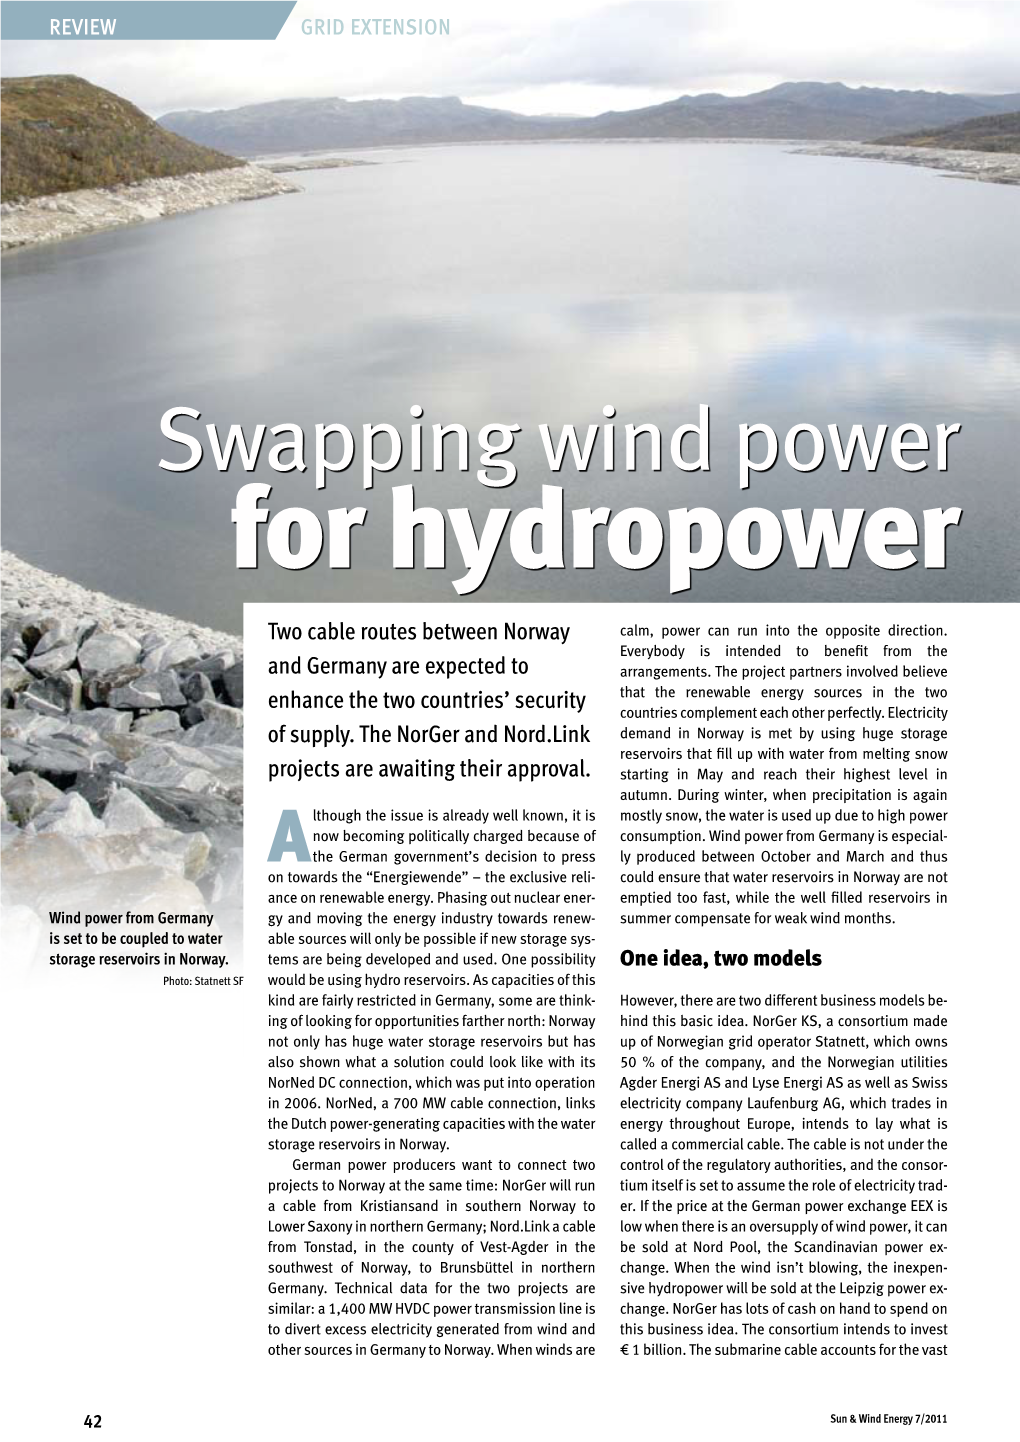 For Hydropower